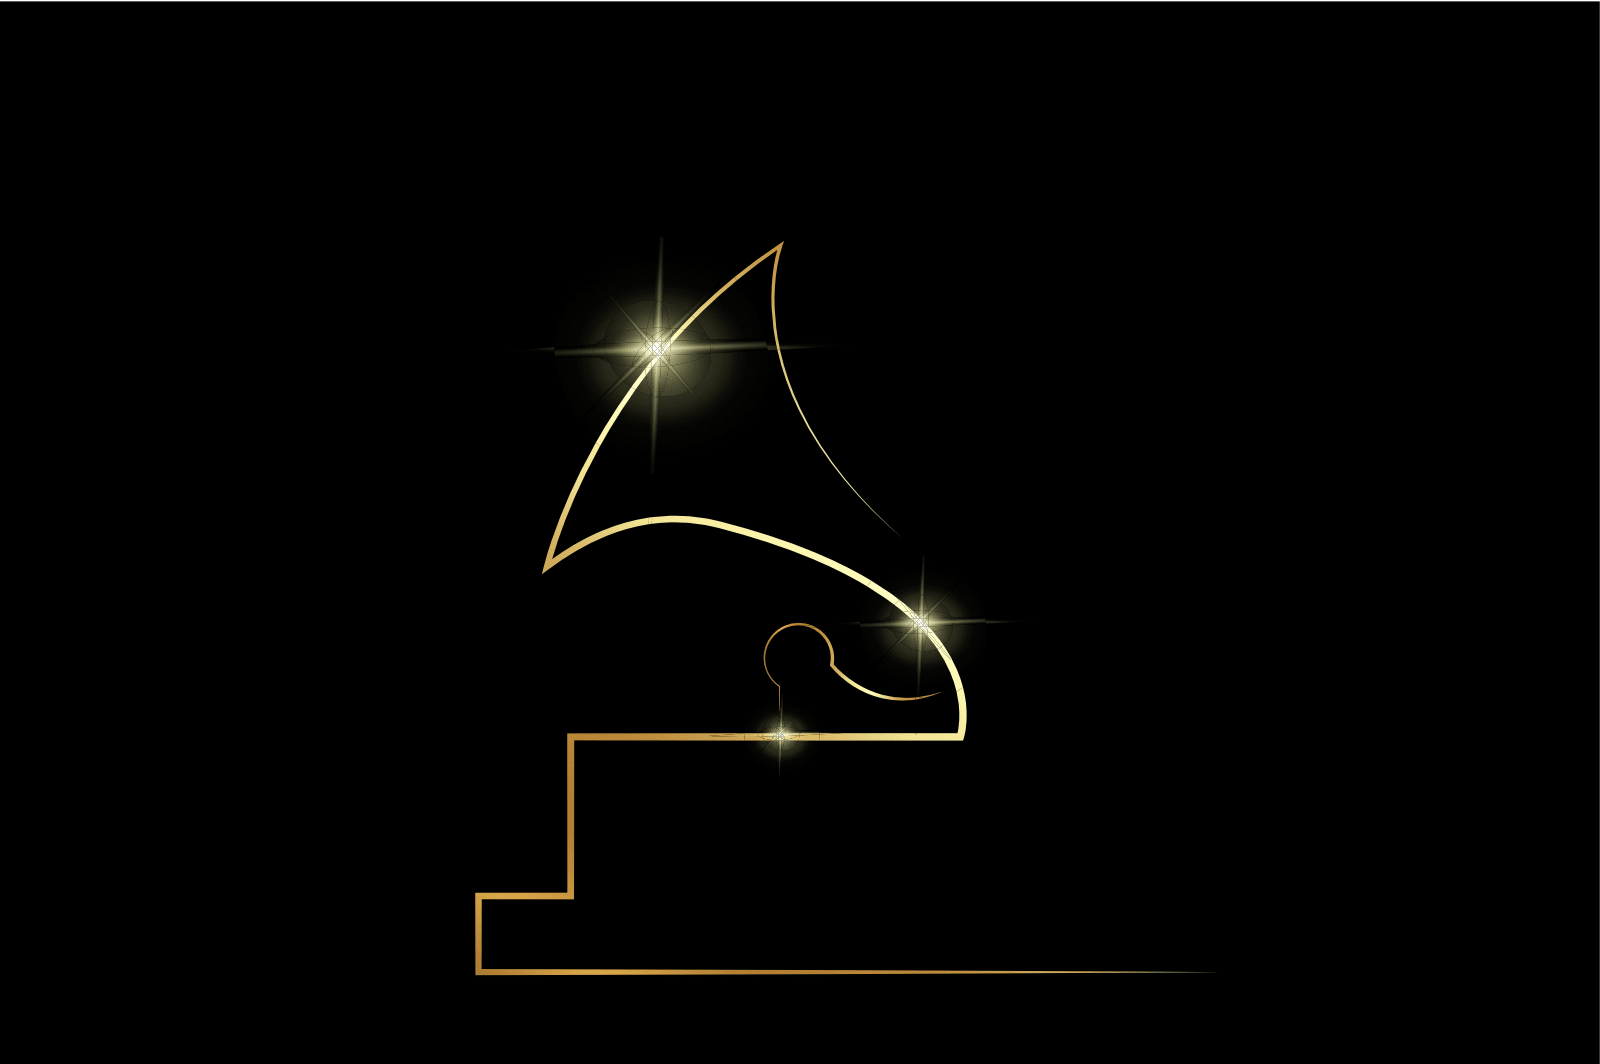 Congratulations Snarky Puppy on your Grammy win for Best Contemporary Instrumental Album of the year!